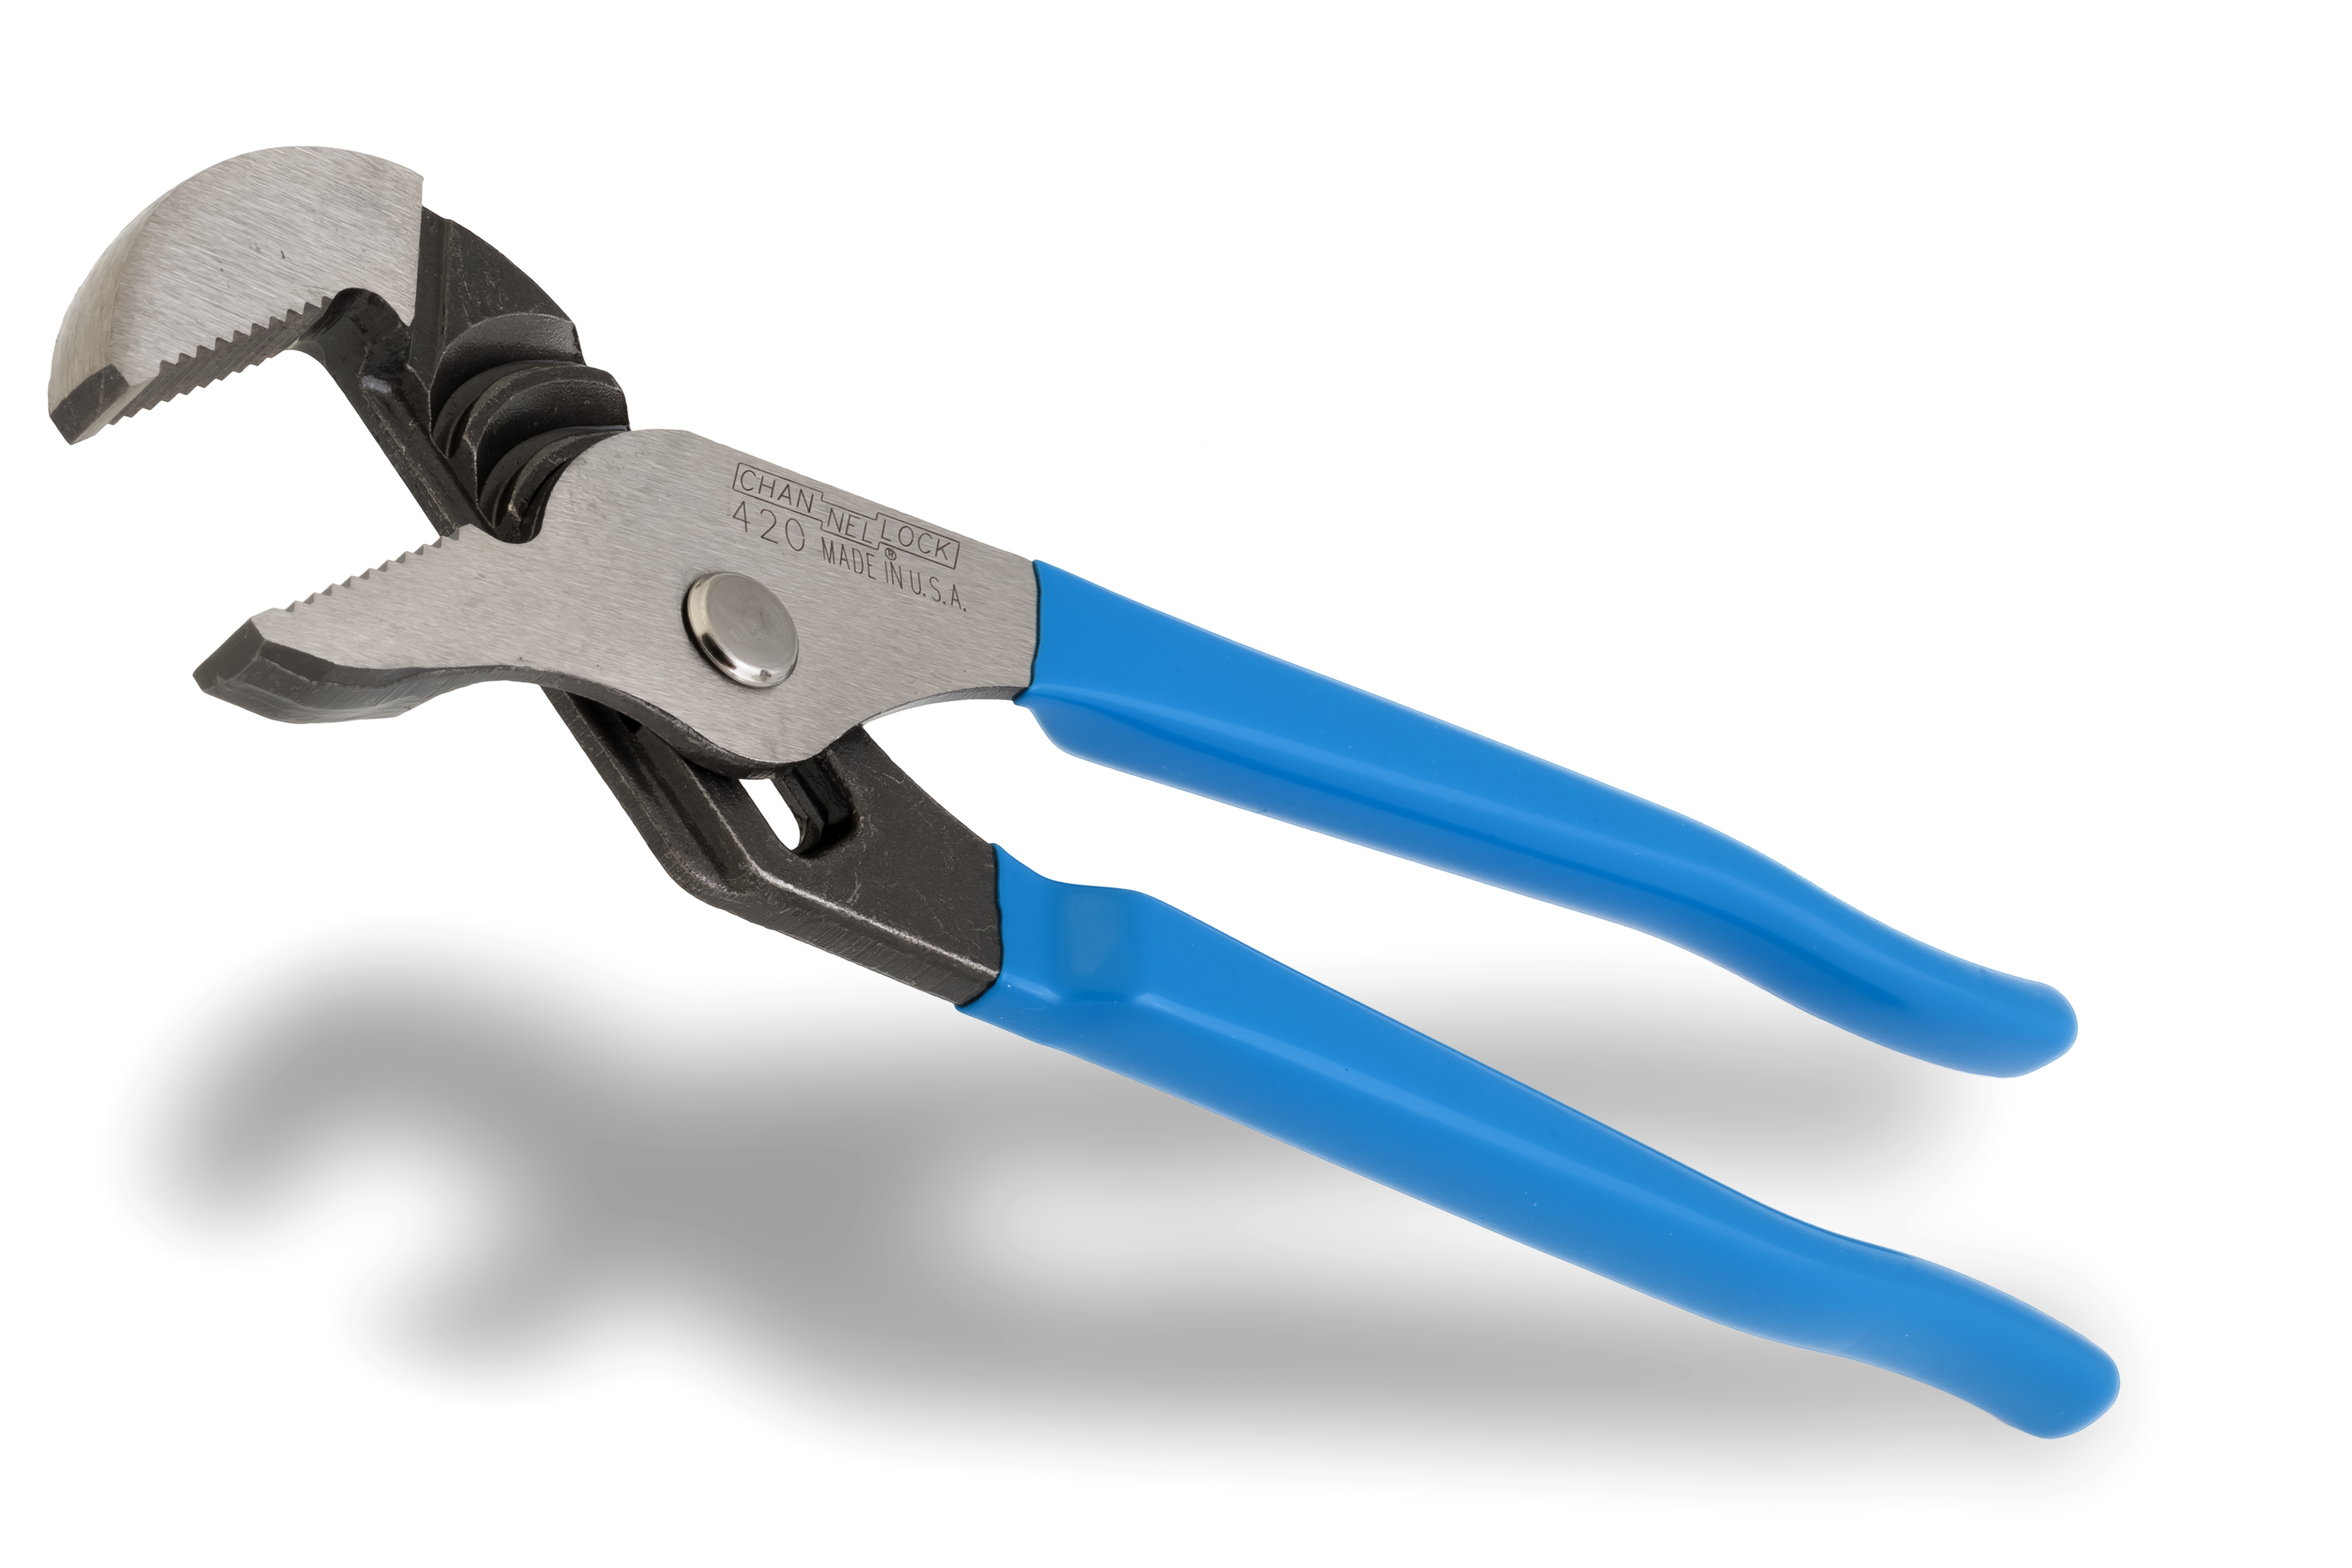 CHANNELLOCK 9.5-INCH STRAIGHT JAW TONGUE & GROOVE PLIERS 1